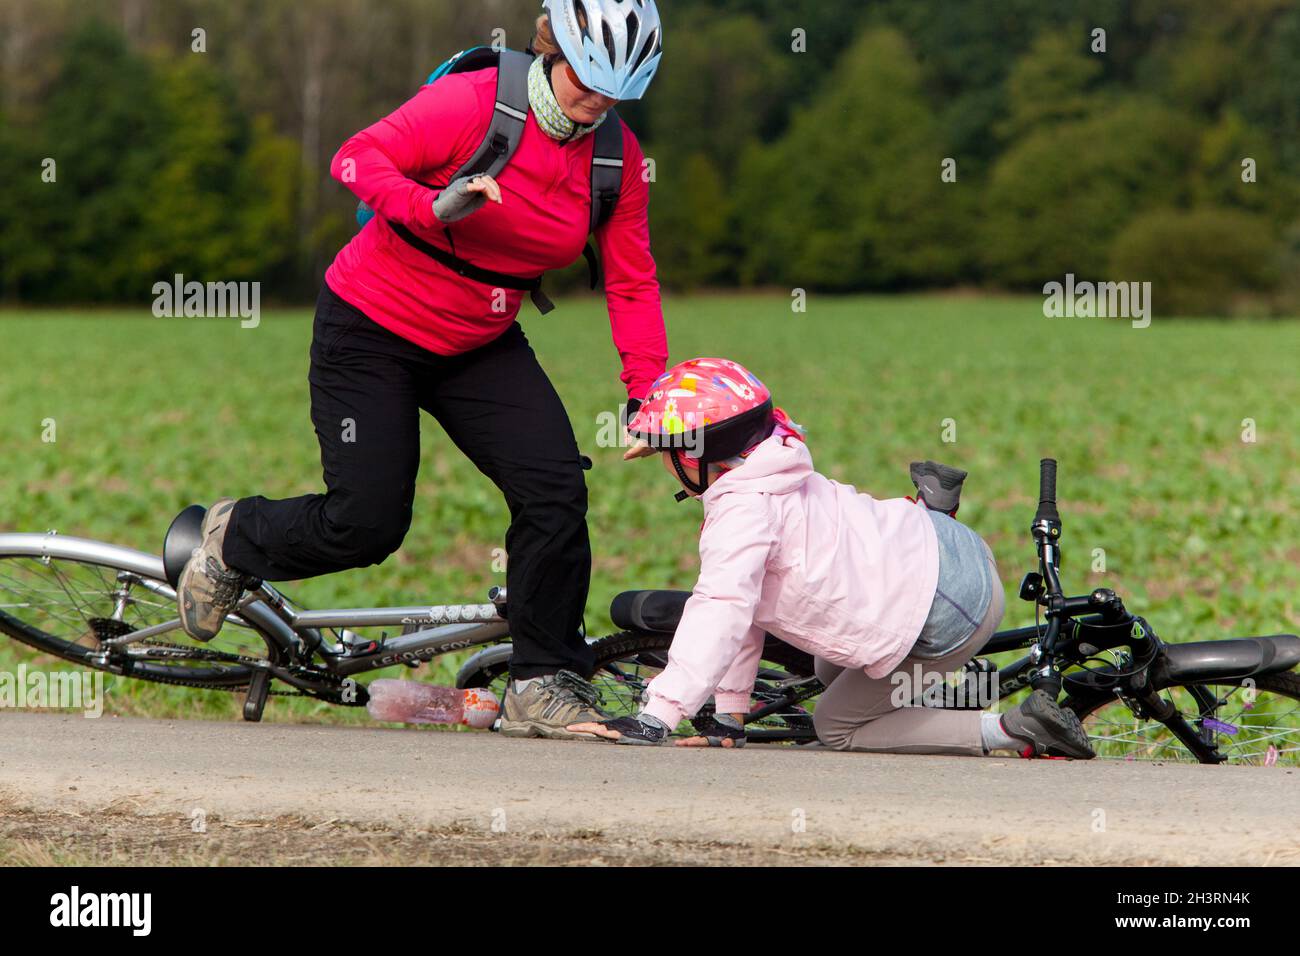 Child after falling off the bicycle, a girl with a bike helmet, woman rushing for help Stock Photo